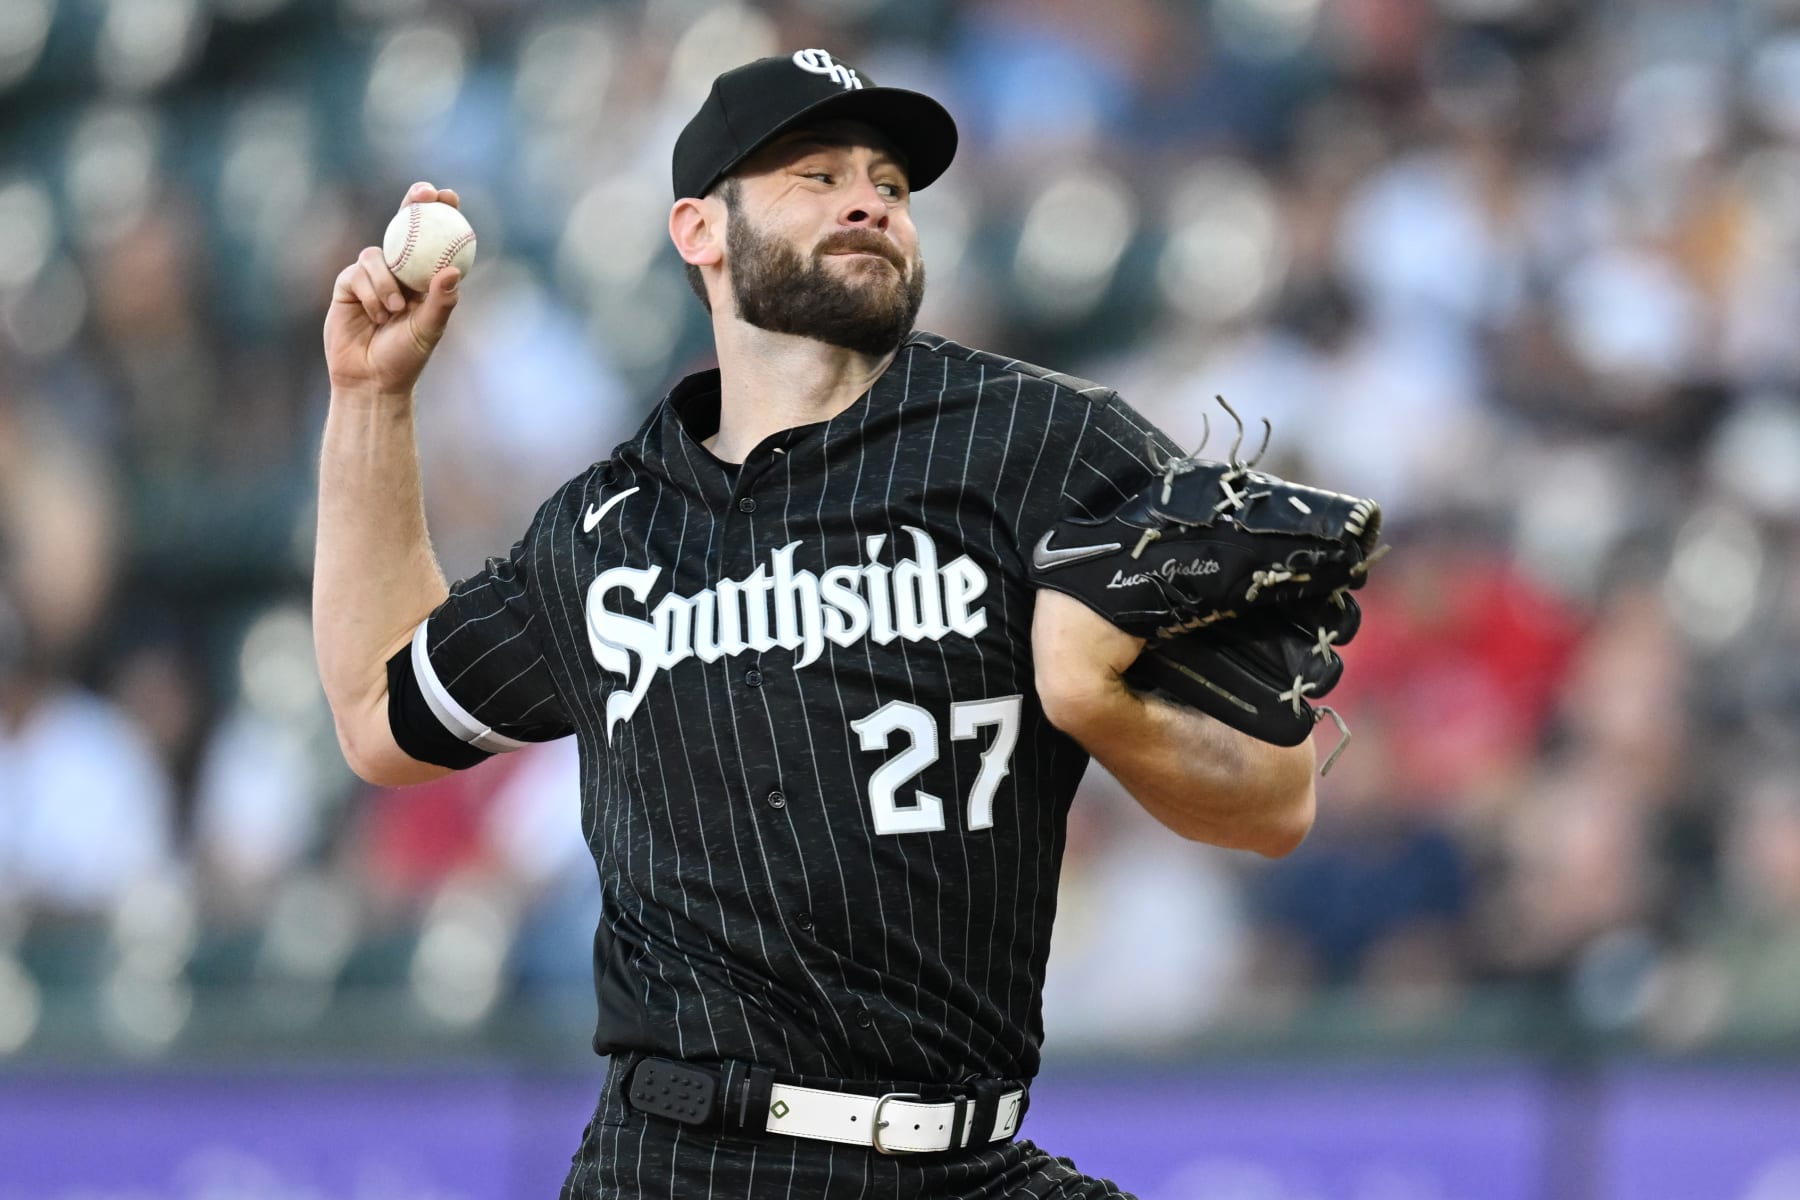 White Sox 4, Guardians 1: Giolito shuts Cleveland down - South Side Sox